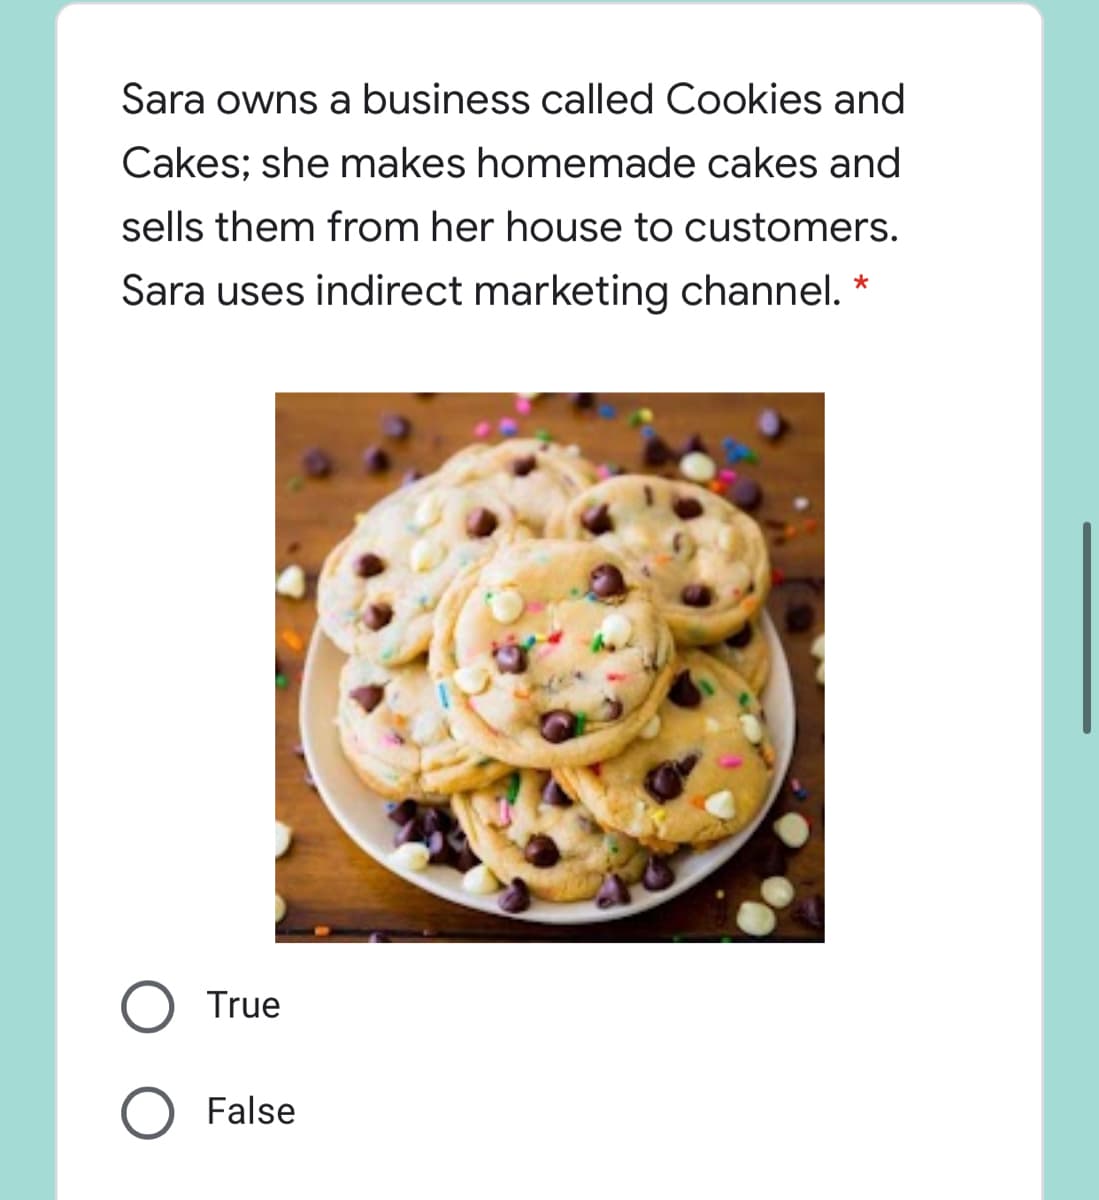 Sara owns a business called Cookies and
Cakes; she makes homemade cakes and
sells them from her house to customers.
Sara uses indirect marketing channel.
True
False
